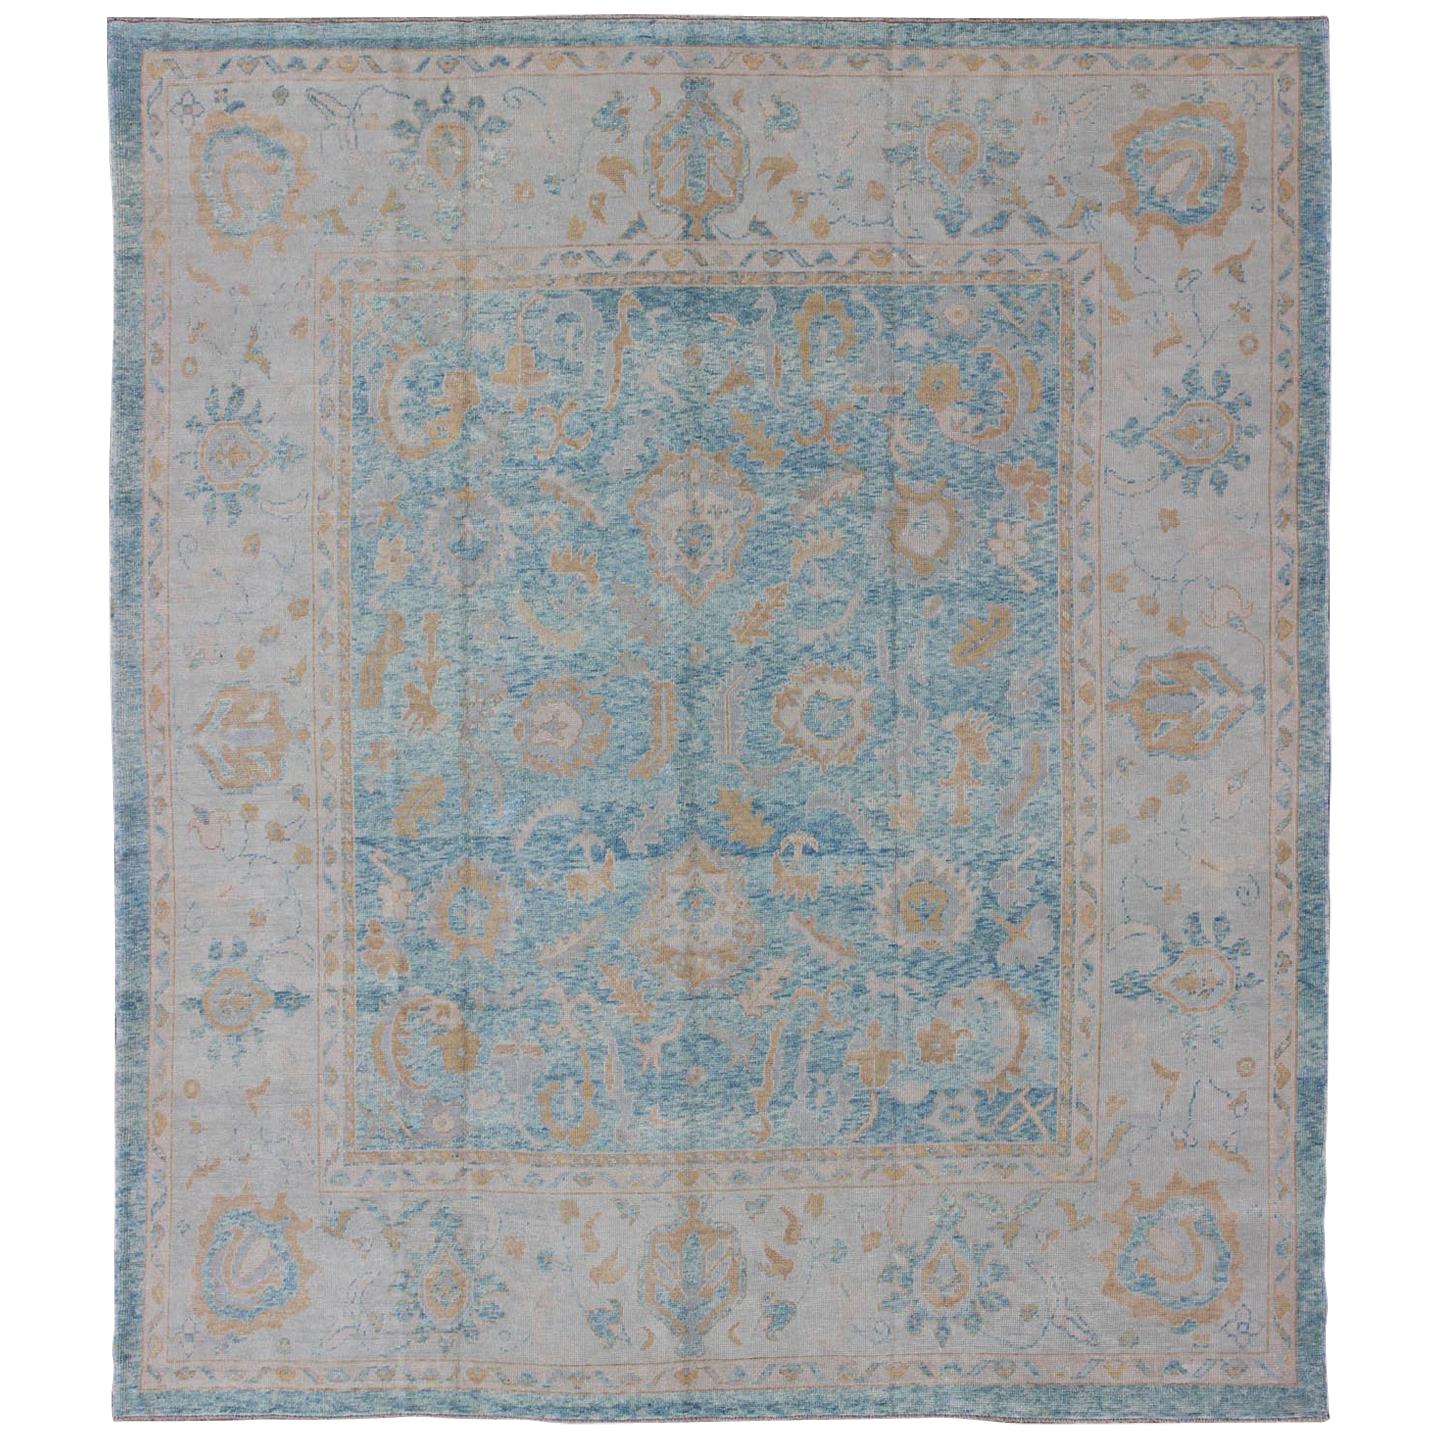 Angora Turkish Oushak Rug in Blue, Silver, Taupe and Tan Colors